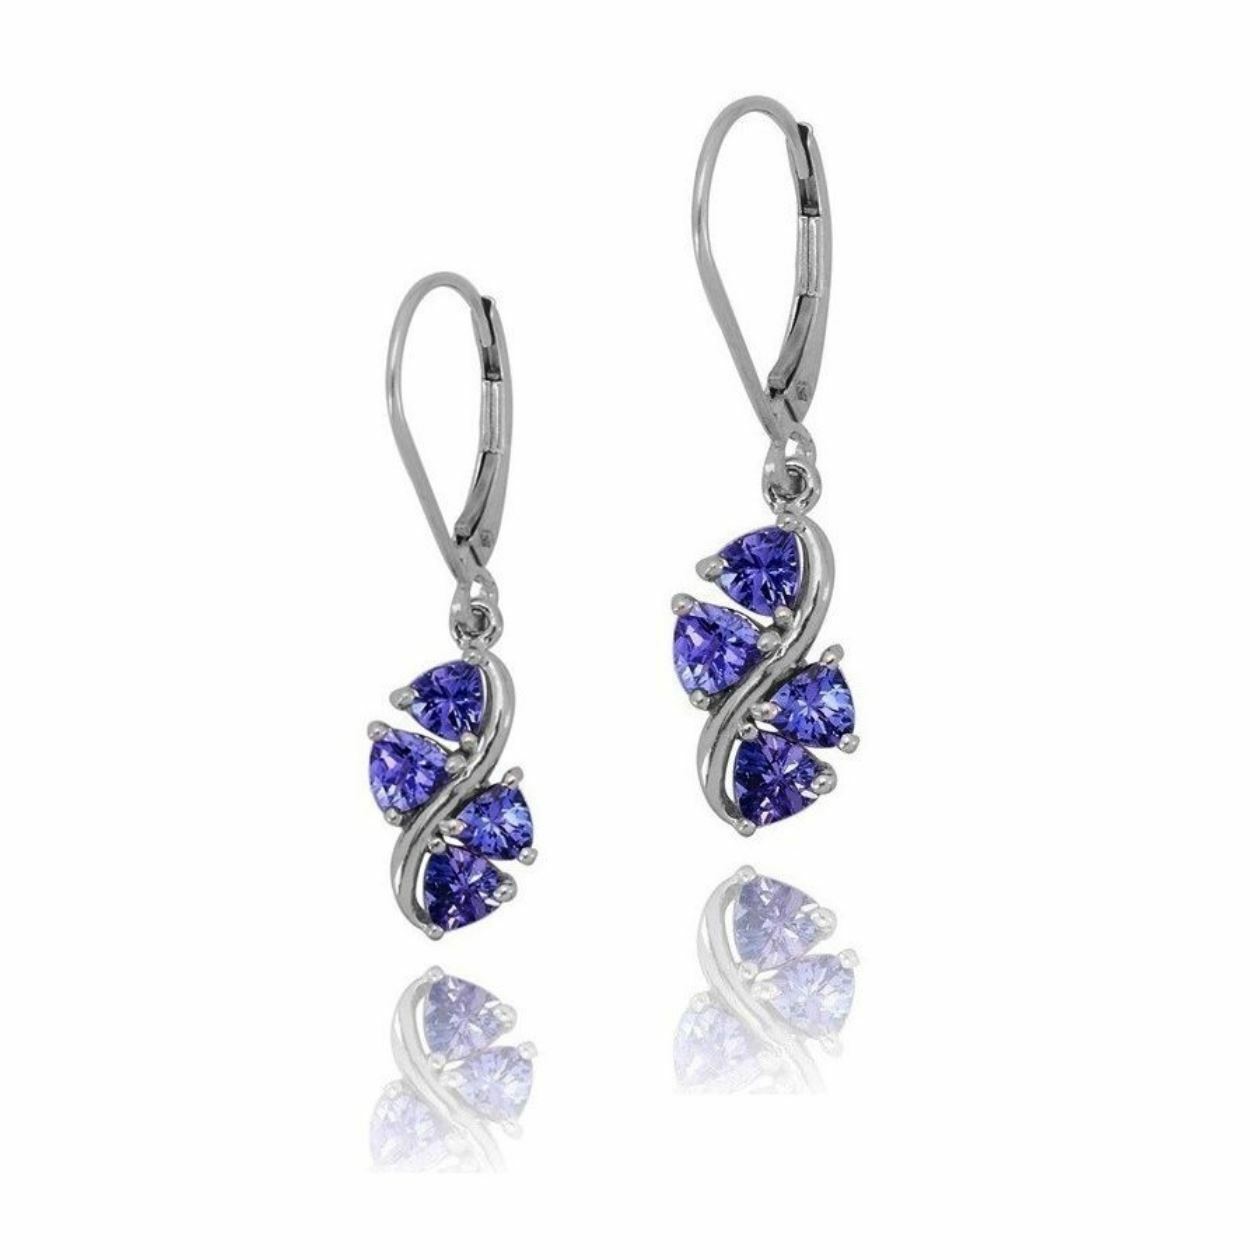 Primary image for 1.80ctw Trillion Tanzanite Leverback Dangle Earrings 14k White Gold over 925 SS